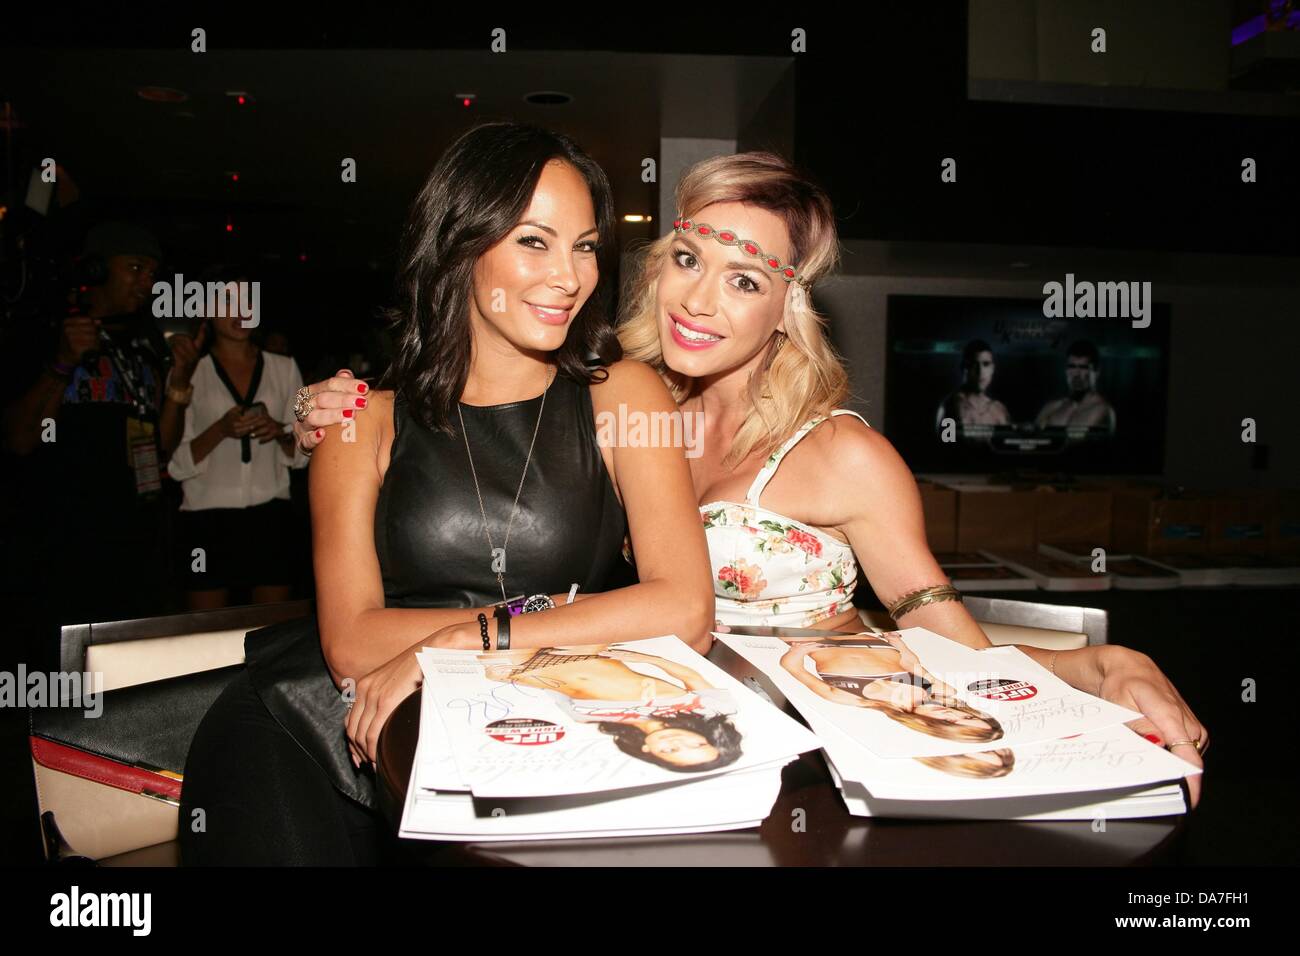 Las Vegas, NV. 5th July, 2013. Kenda Perez, Rachelle Leah at arrivals for UFC Fight Week Pre-Fight Party for MMA Fans, Lagasse's Stadium at The Palazzo Resort Hotel Casino, Las Vegas, NV July 5, 2013. Credit:  James Atoa/Everett Collection/Alamy Live News Stock Photo